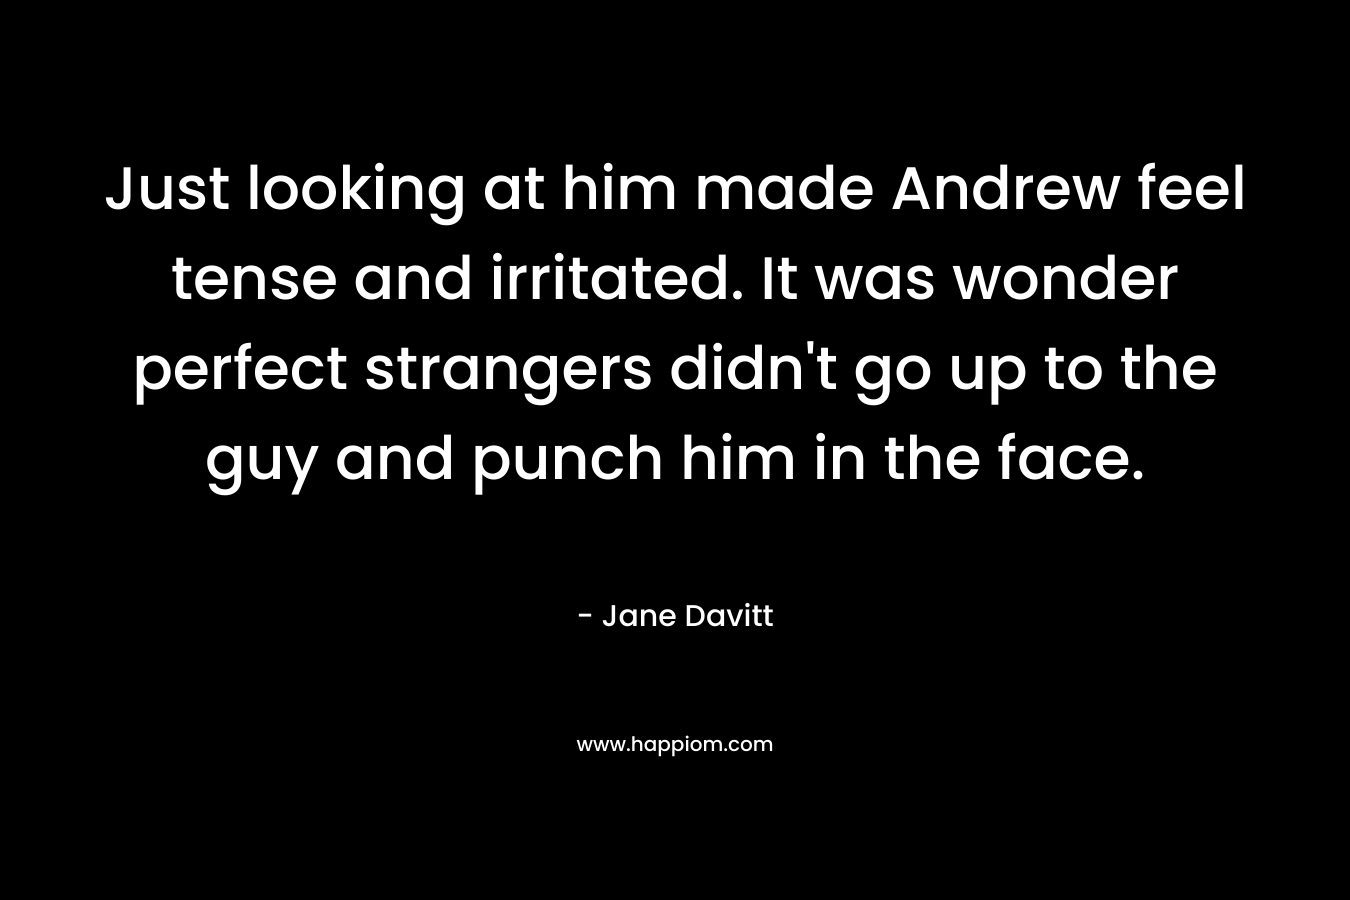 Just looking at him made Andrew feel tense and irritated. It was wonder perfect strangers didn’t go up to the guy and punch him in the face. – Jane Davitt